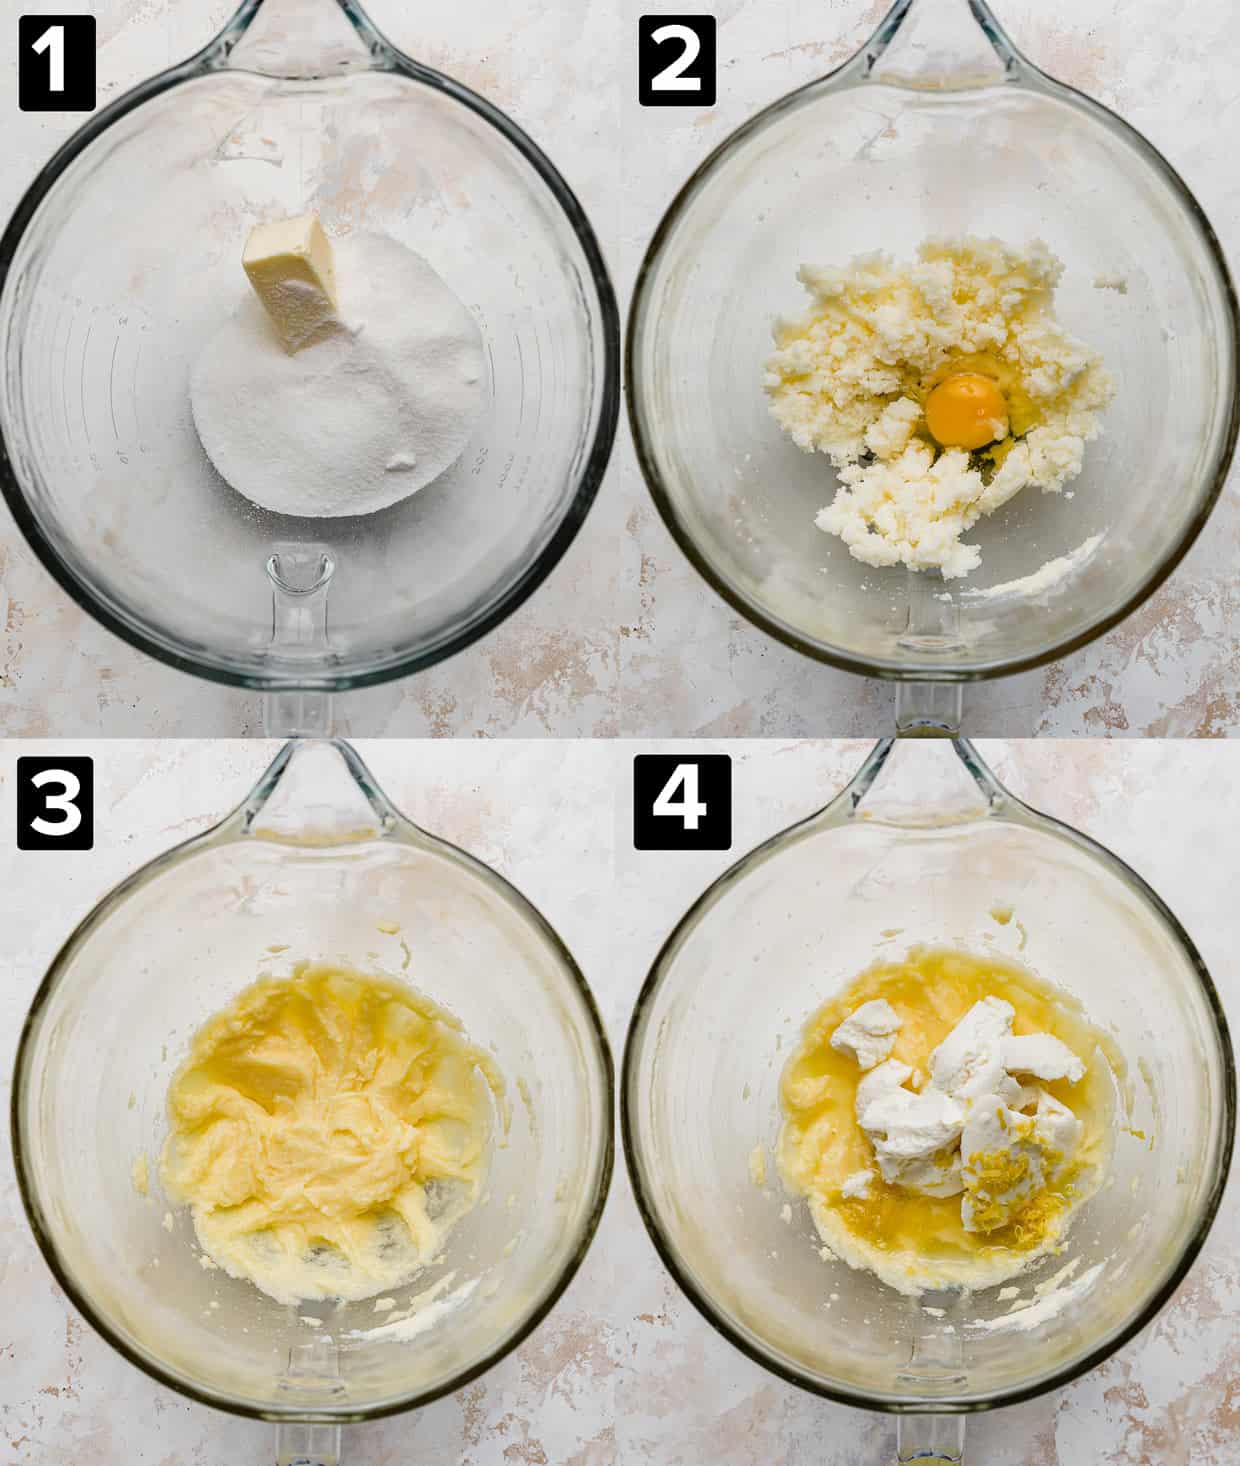 Four photos illustrating how to make lemon ricotta cookies: sugar and butter in a glass bowl, creamed butter and sugar with an egg, and the resulting mixture. 